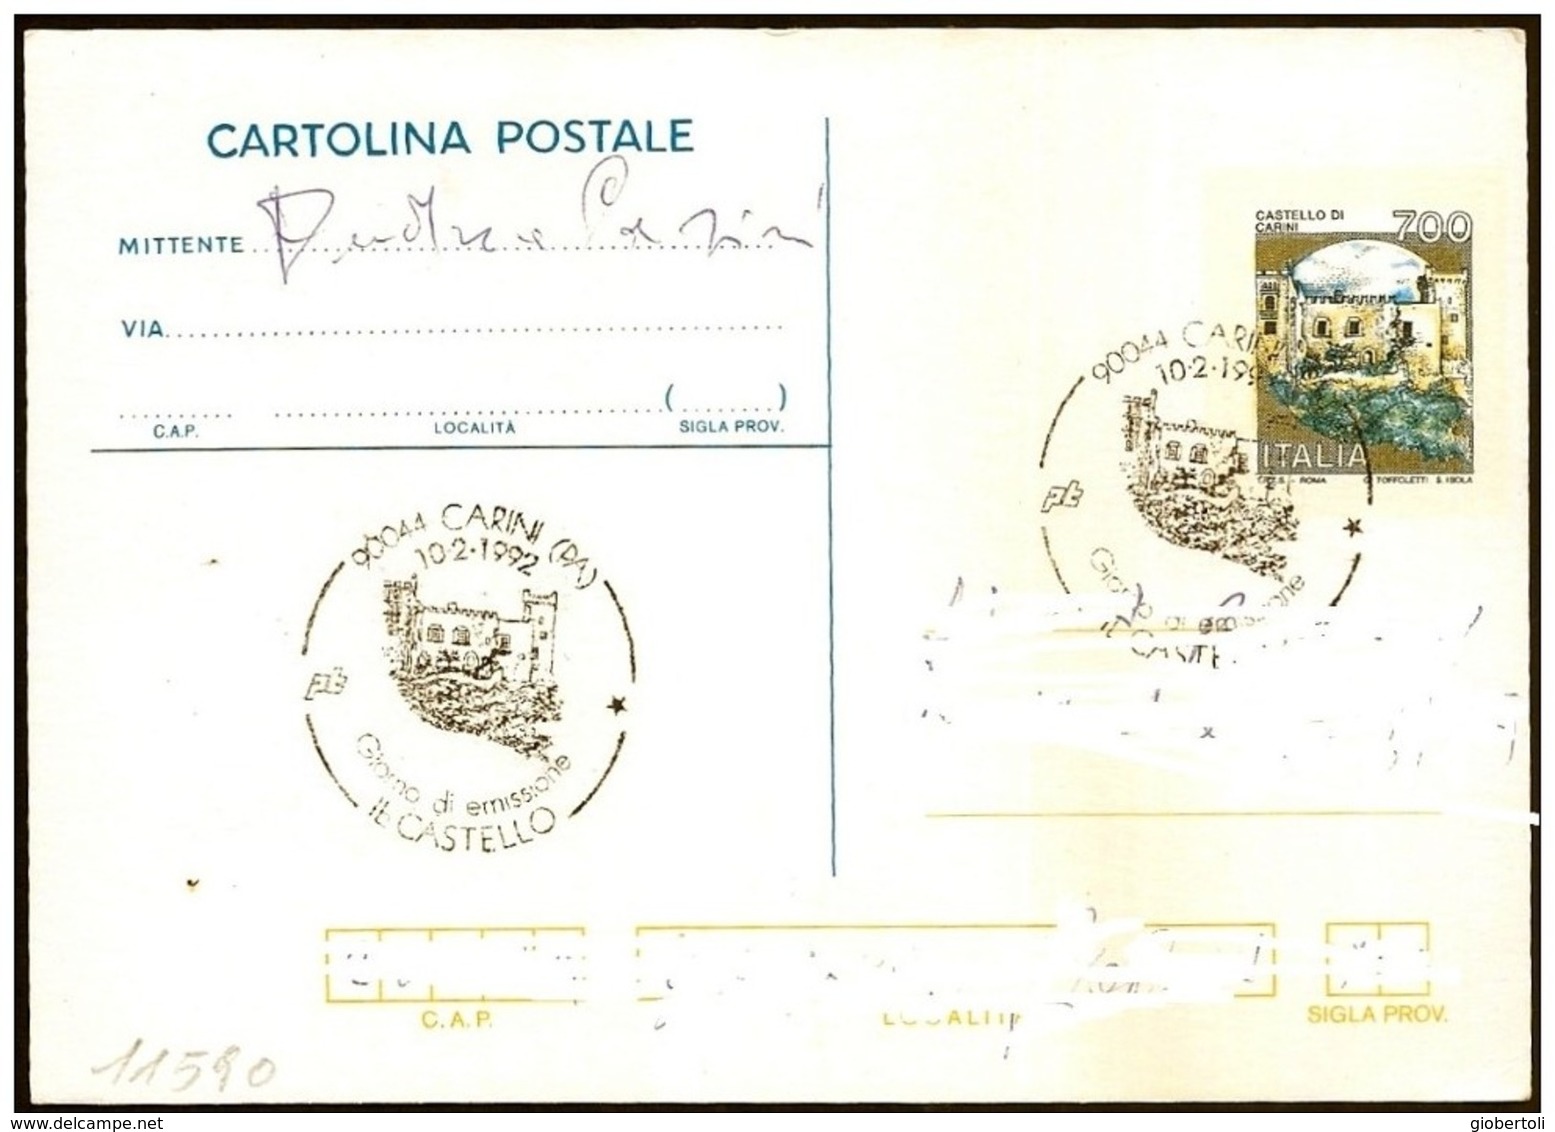 Italia/Italy/Italie: FDC, Intero, Stationery, Entier, Stampa Spostata, Printing Shifted, Impression Déménagé, Castle, Ch - Stamped Stationery